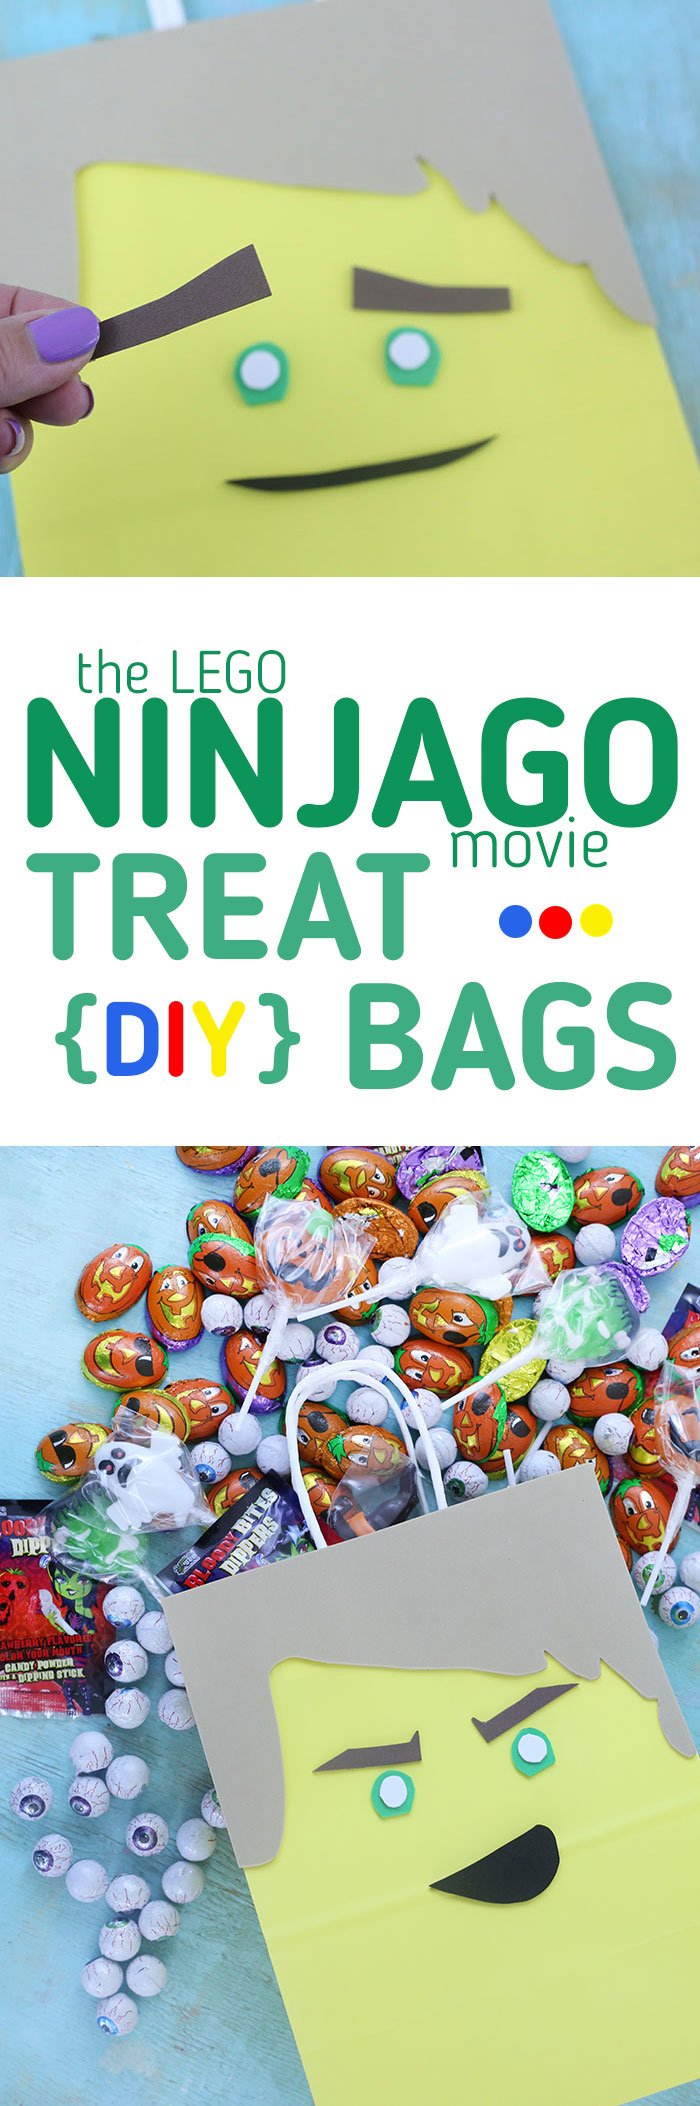 Ninjago Movie DIY. Make cute treat bags for parties or halloween. Easy craft to do with kids in celebration of The LEGO Ninjago movie.